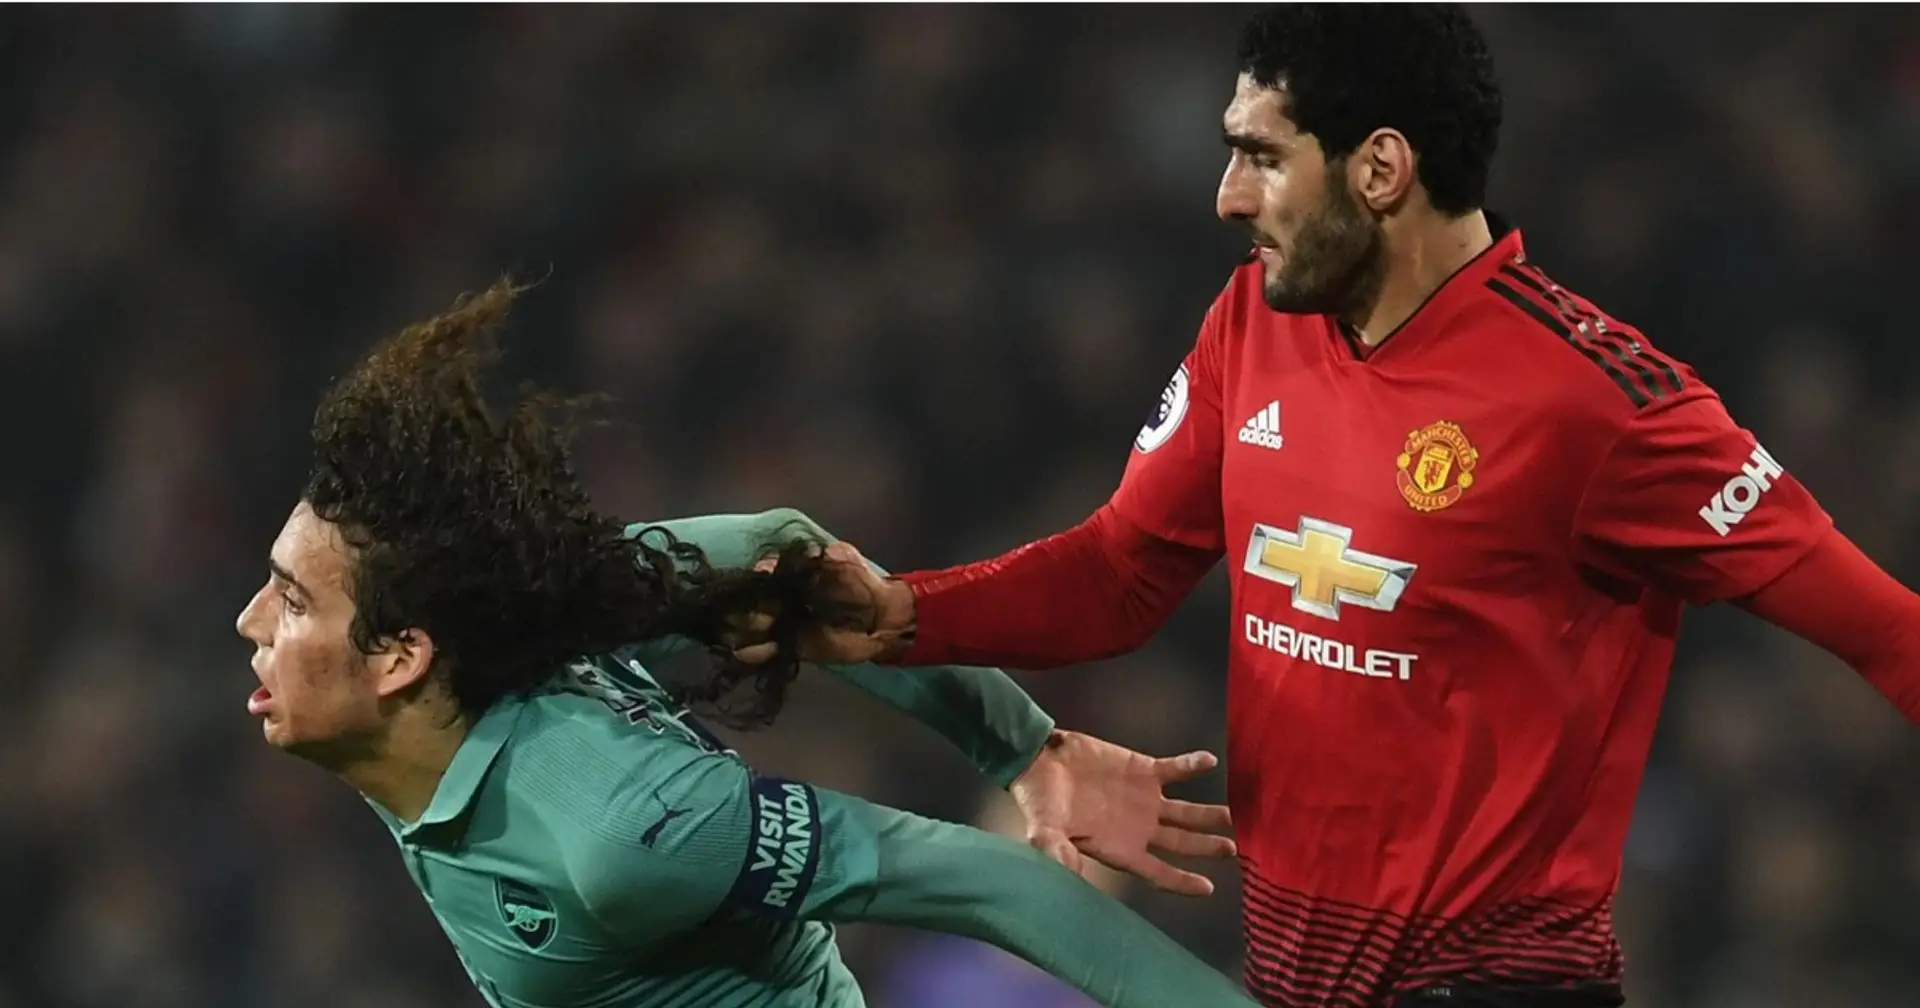 'No one had ever done that to me on a pitch': Guendouzi on why he hated playing against Fellaini